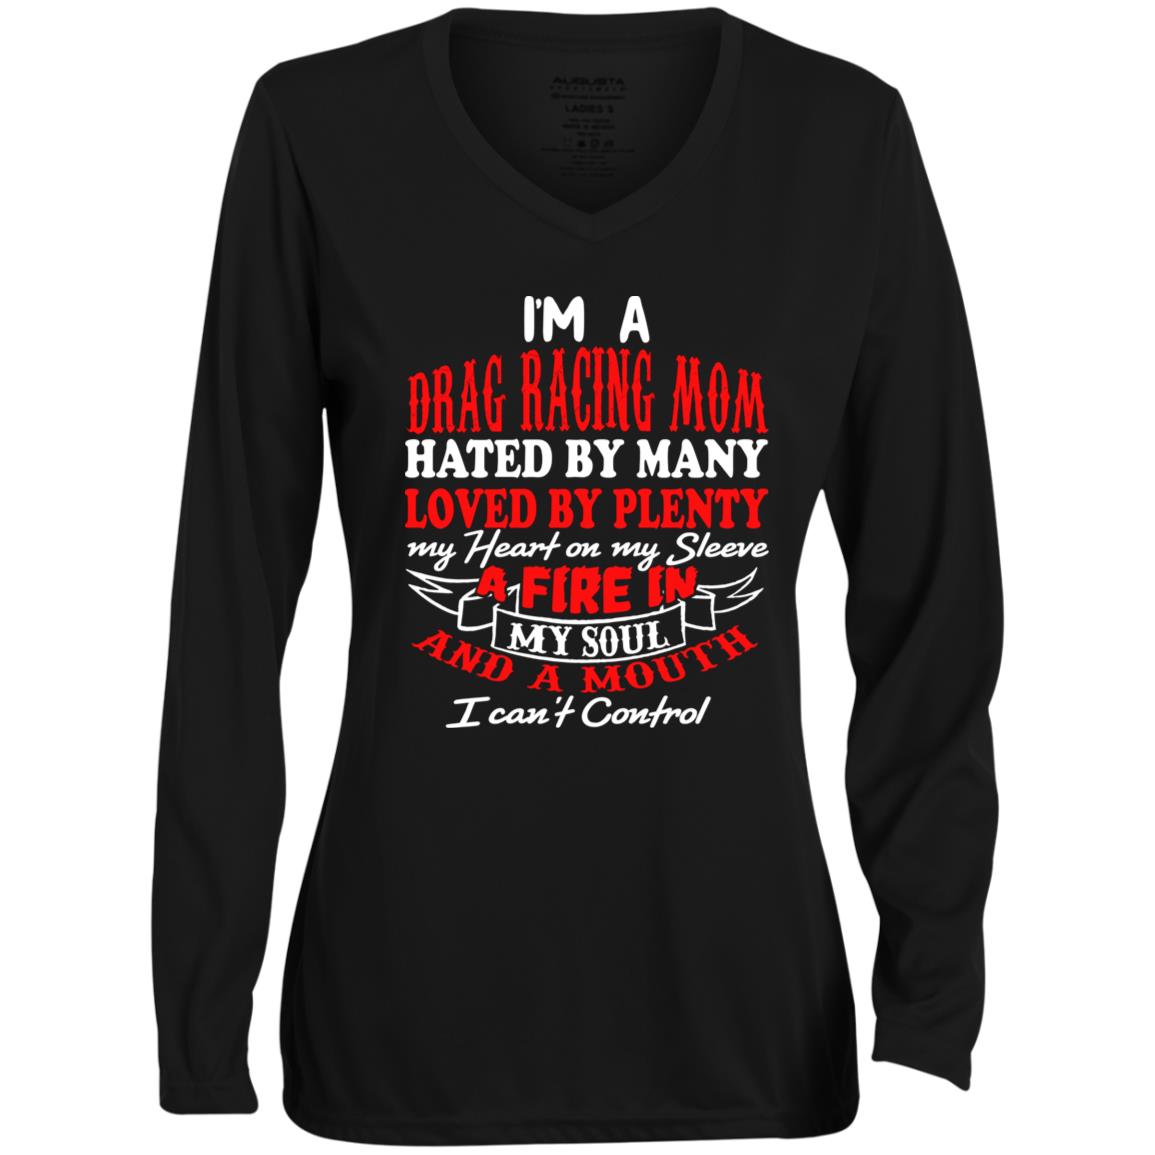 I'm A Drag Racing Mom Hated By Many Loved By Plenty Ladies' Moisture-Wicking Long Sleeve V-Neck Tee